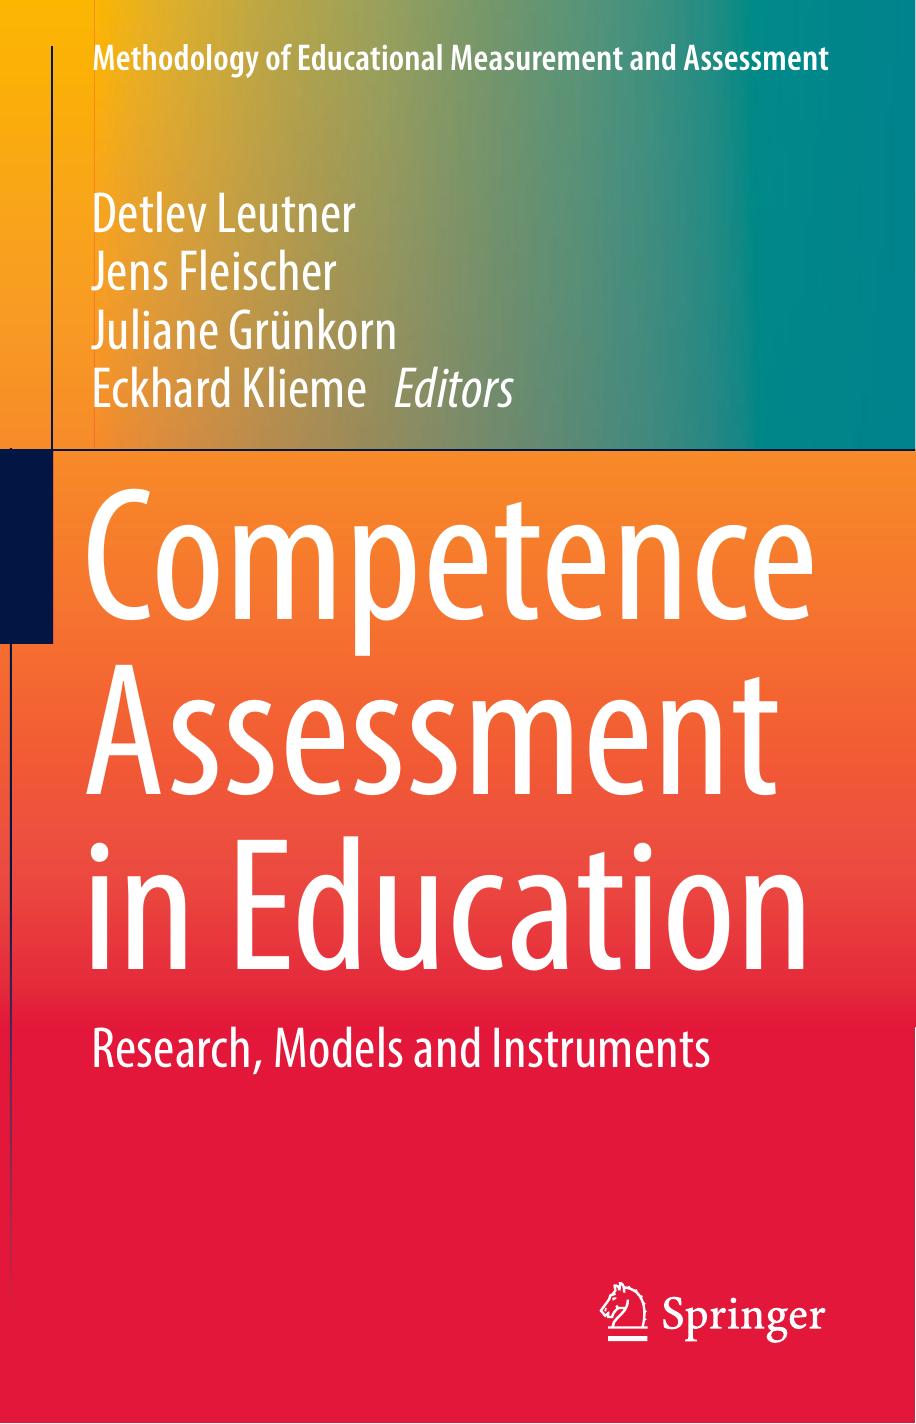 Competence Assessment in Education  Research, Models and Instruments 2017.pdf